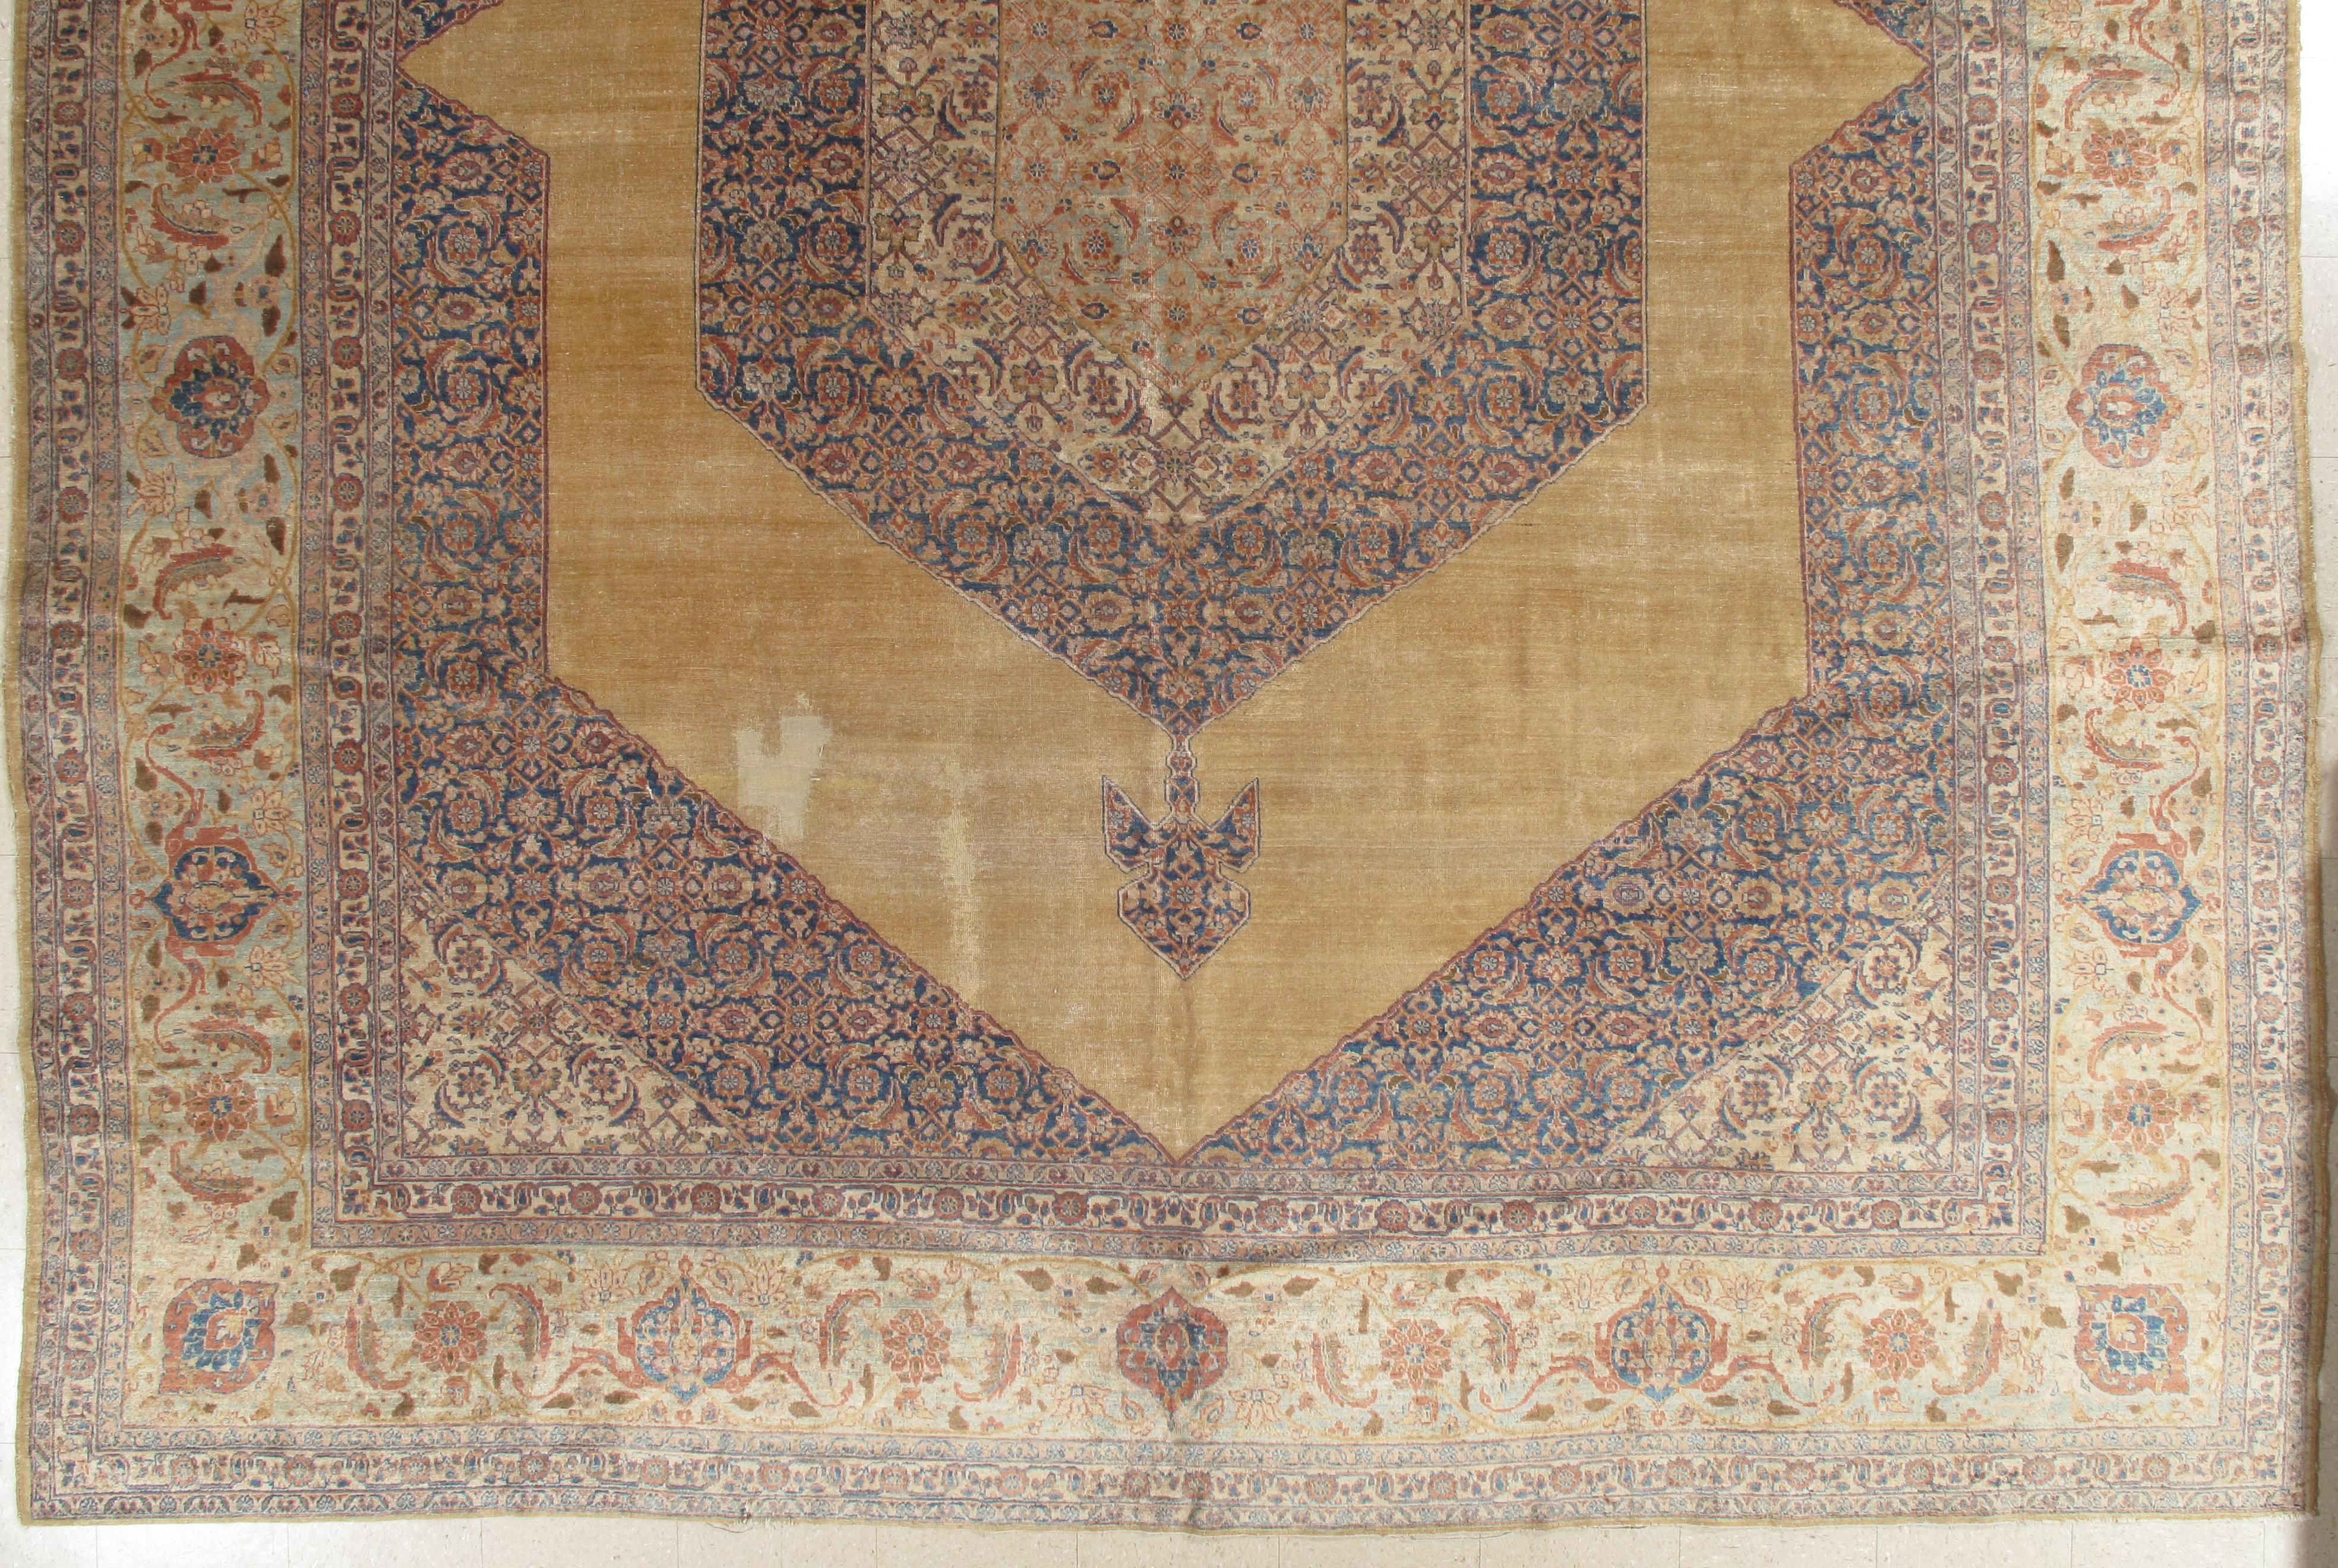 Hand-Woven Antique Tabriz Carpet, Persian Rug, Earth Tones, Ivory, Soft Colors For Sale